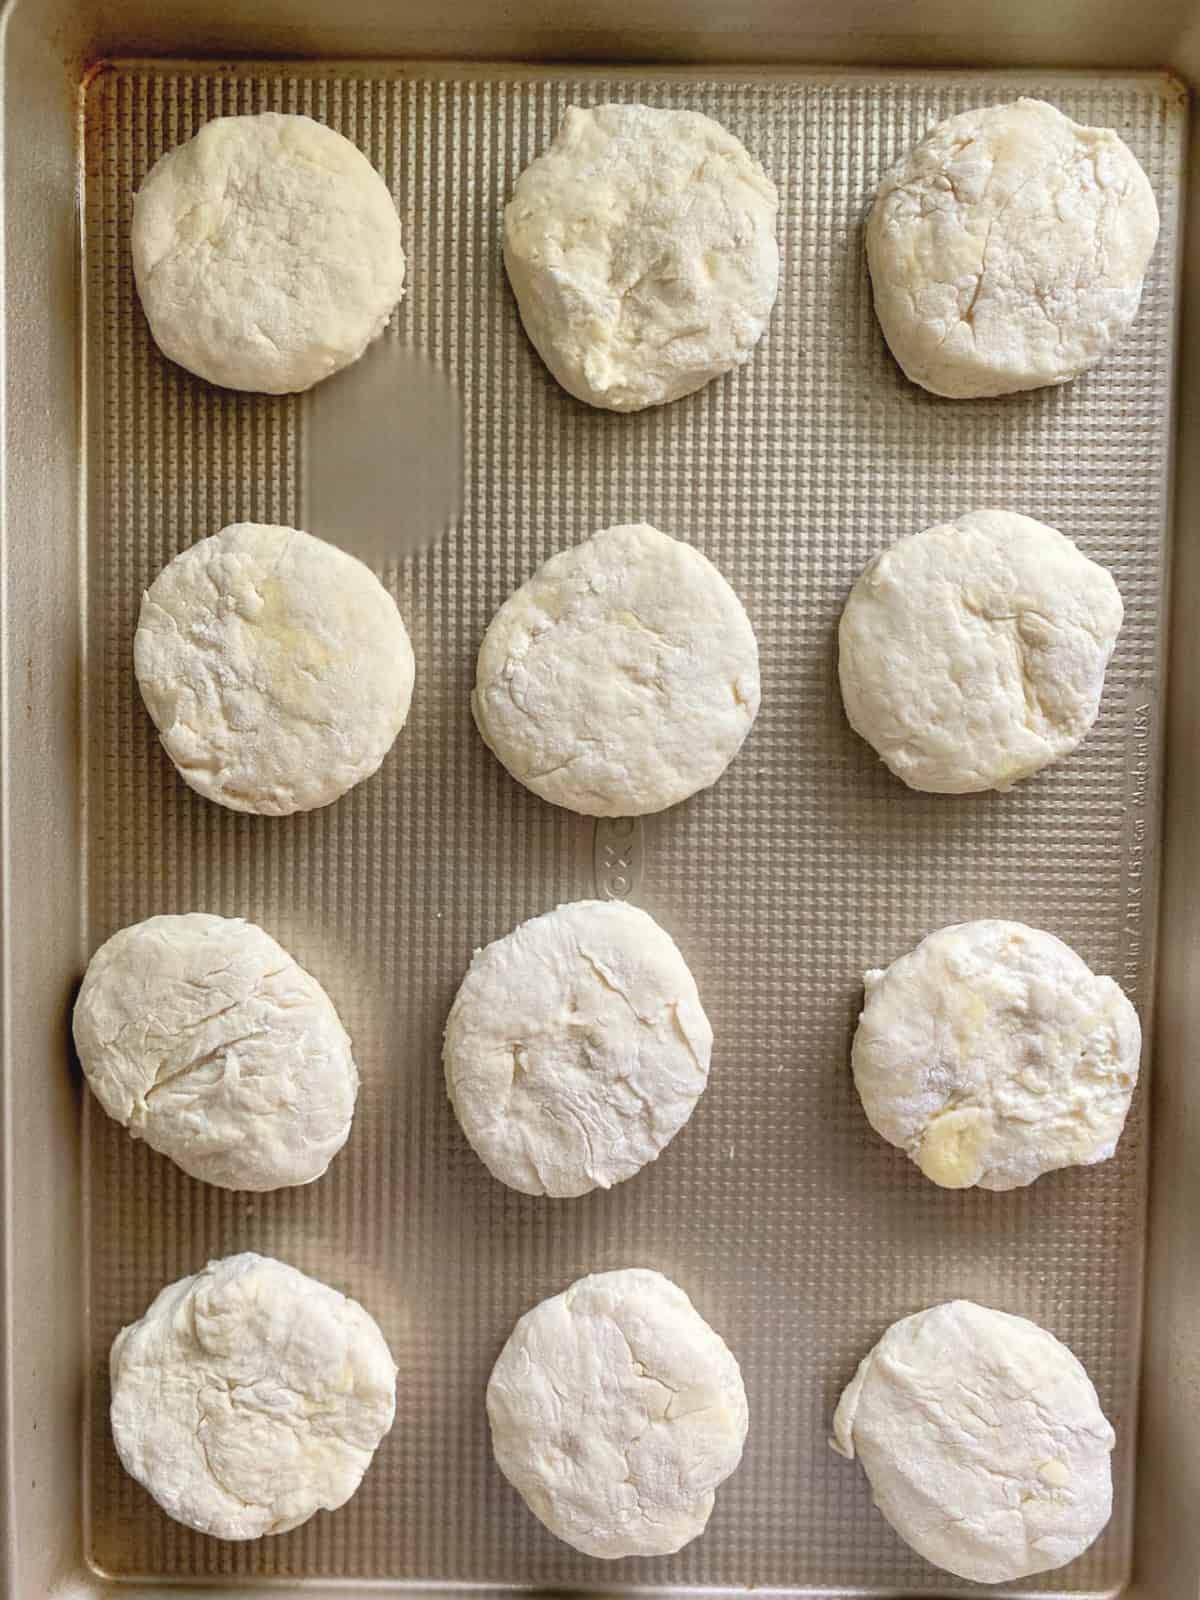 Top view of a dozen raw cut out biscuit dough on a baking sheet.